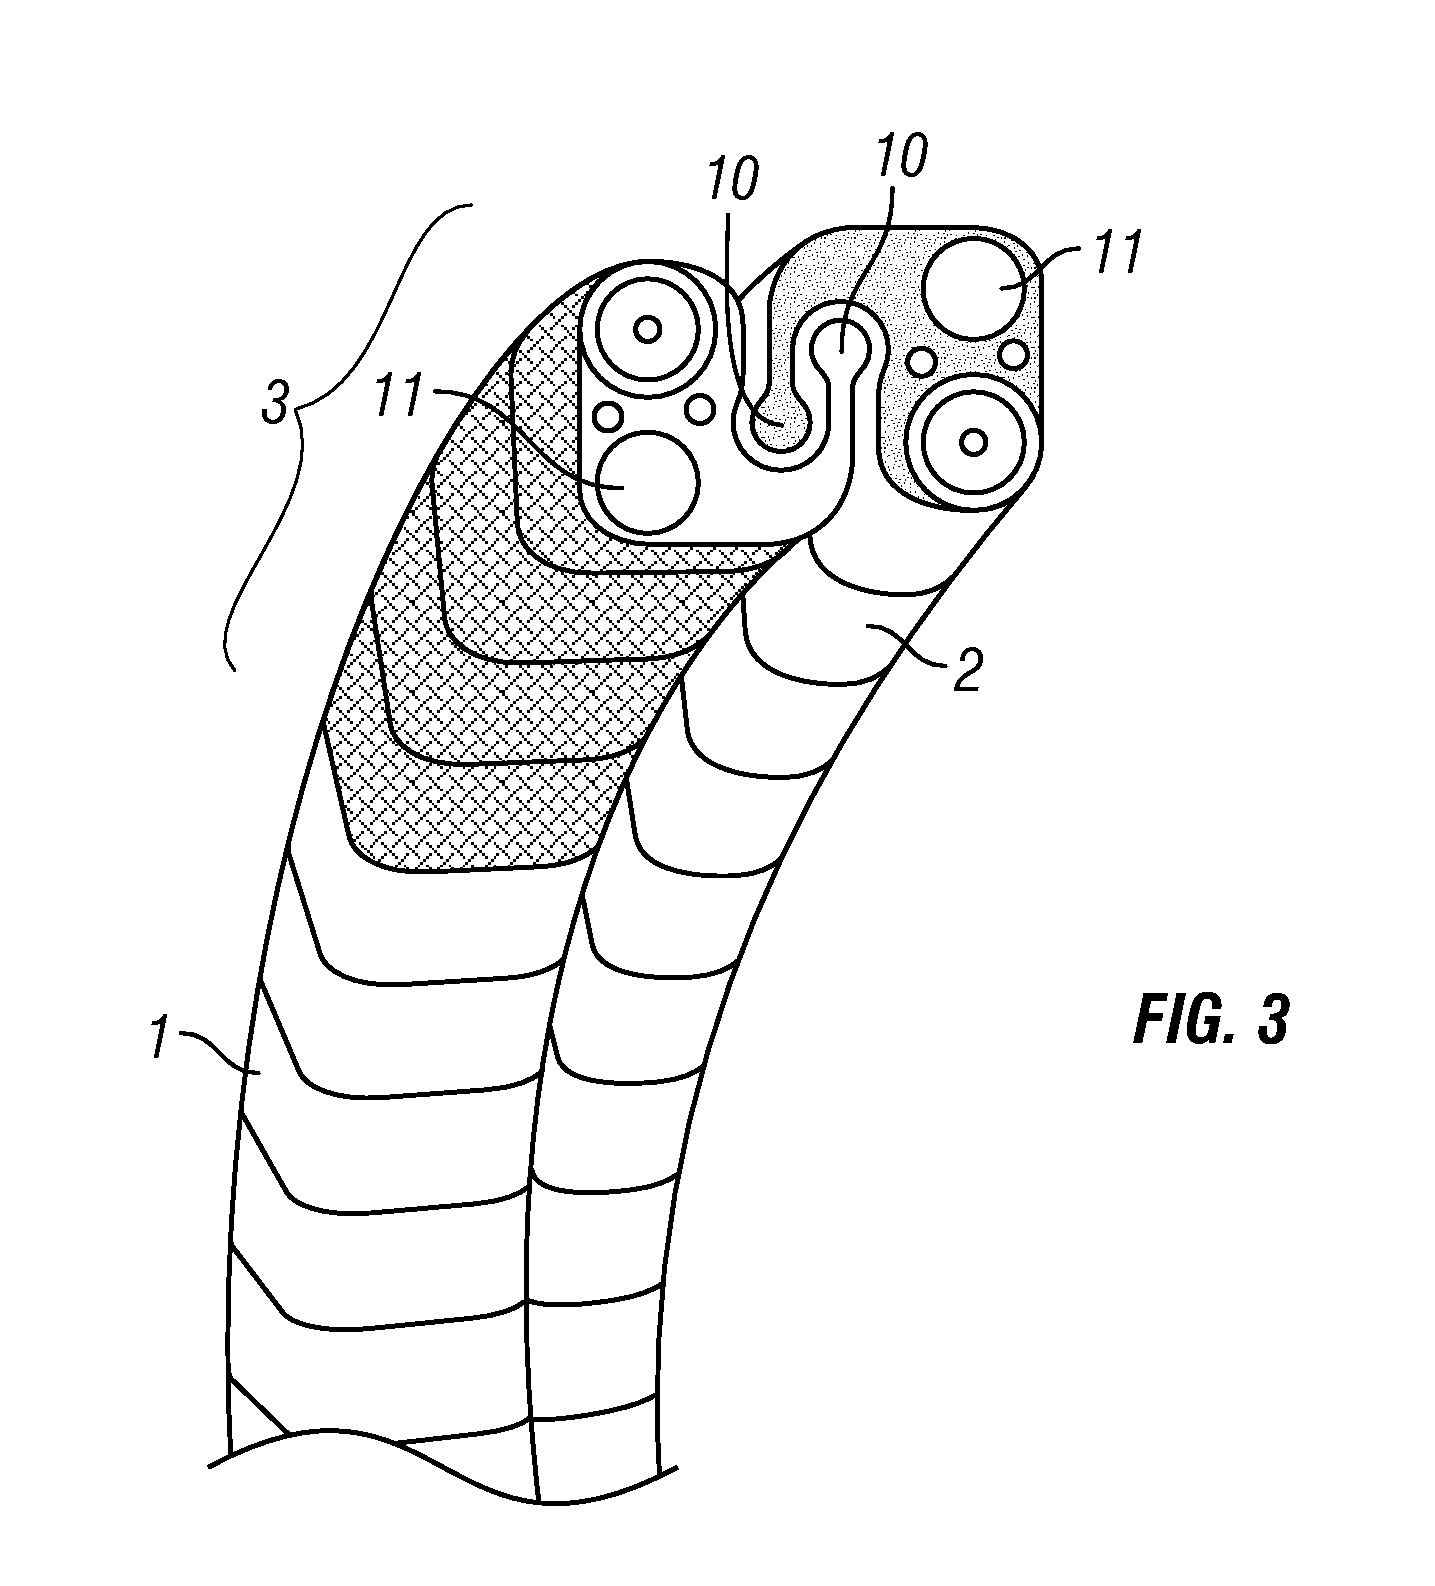 Cannula system for free-space navigation and method of use